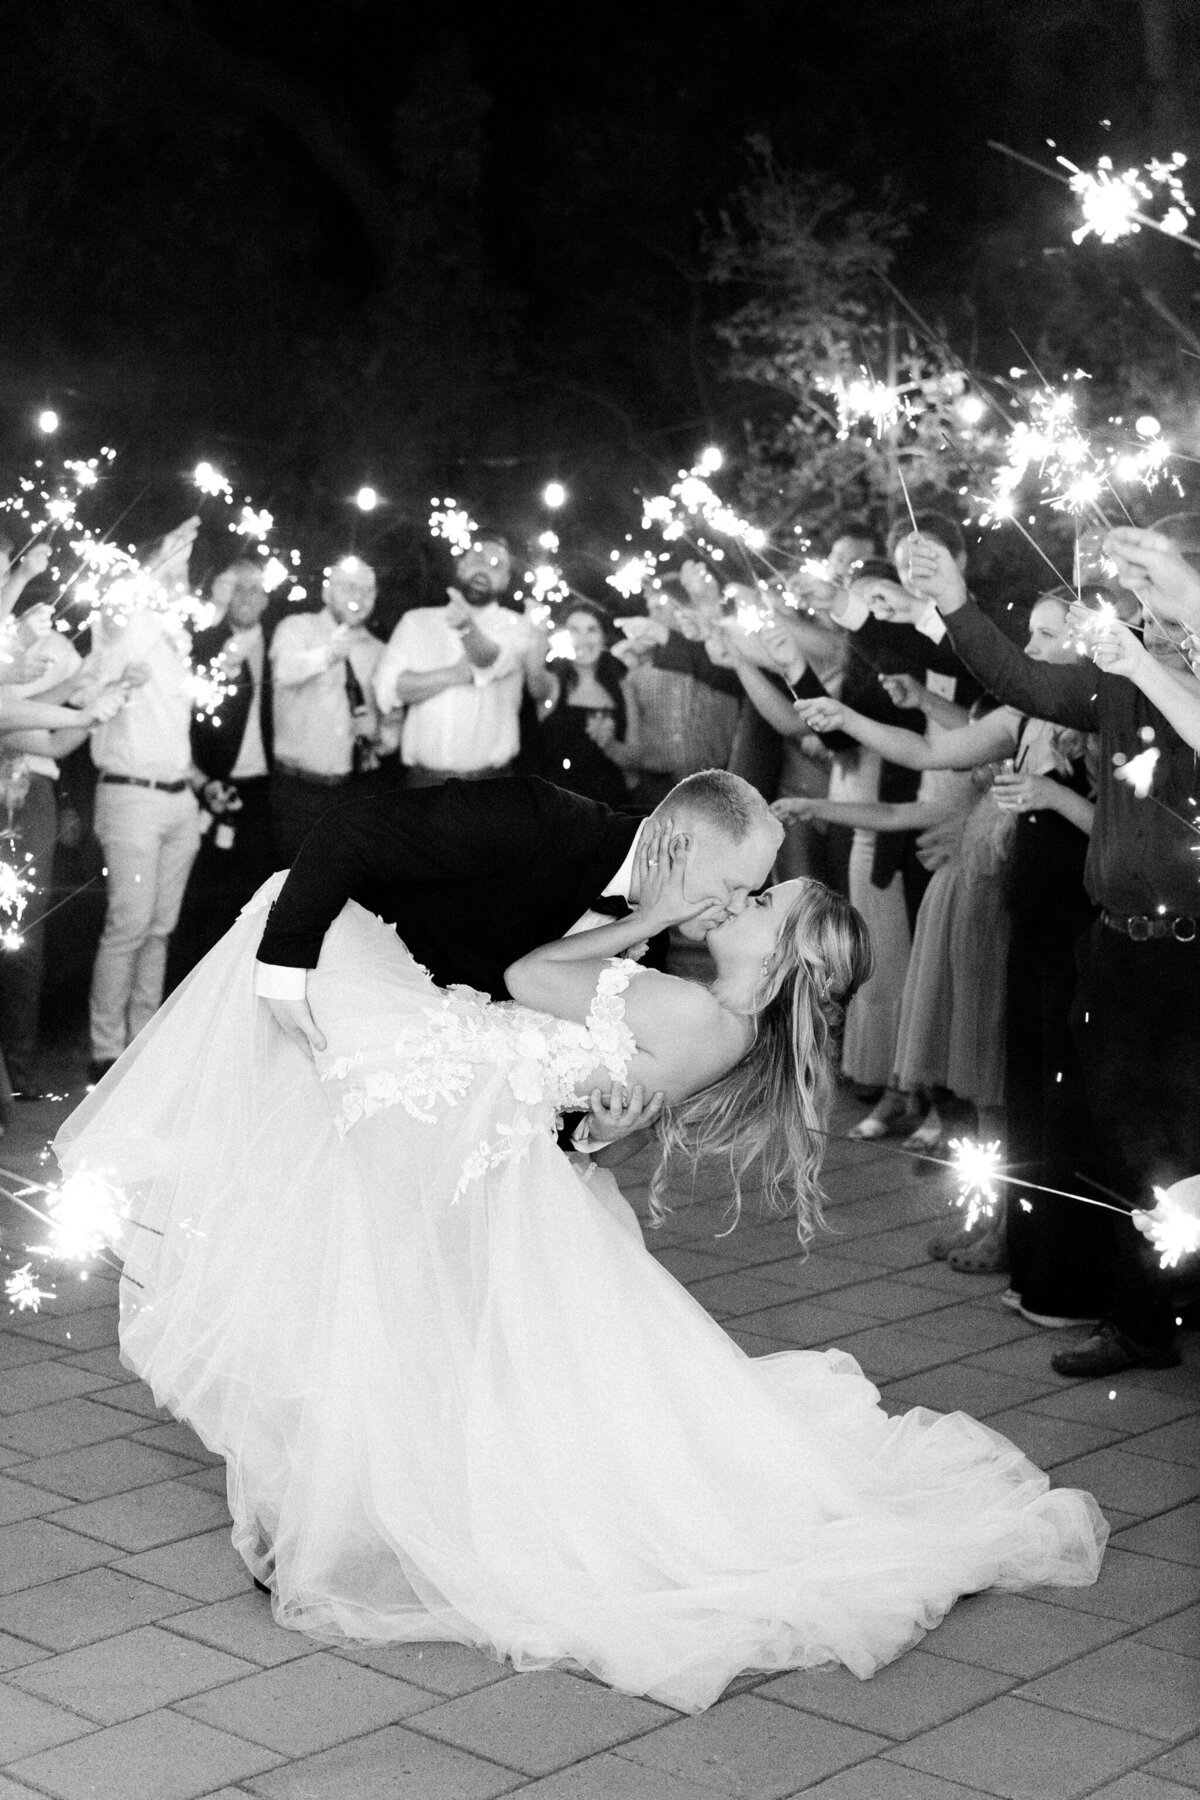 A couple dressed in wedding attire shares a kiss while the groom dips the bride. Guests surround them holding sparklers, creating a celebratory atmosphere that highlights their wedding in Canada.